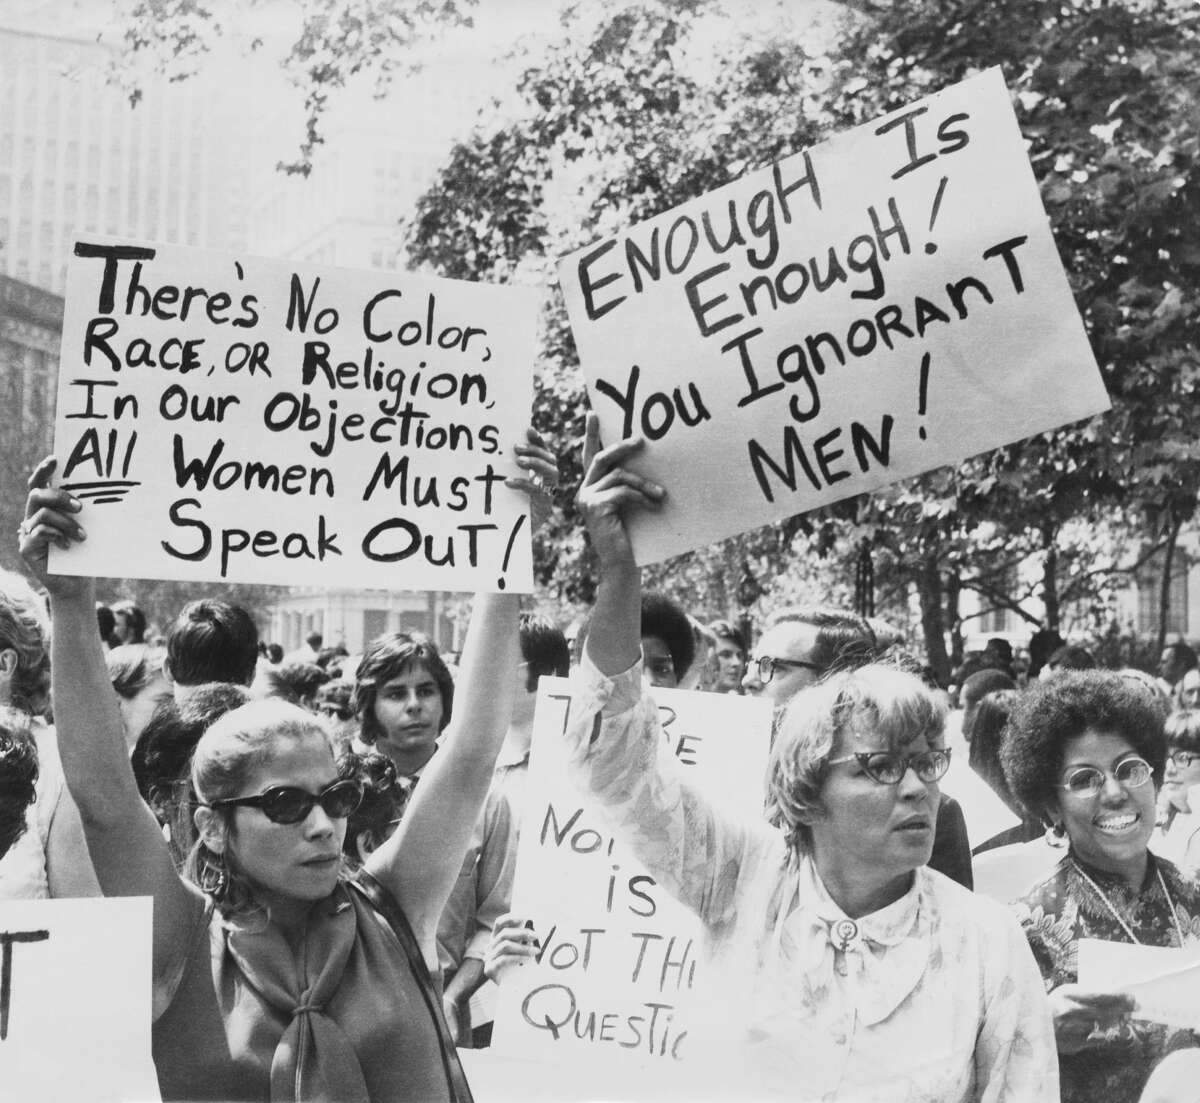 Women hold up signs demanding equal rights during a demonstration for women's liberation, New York City.